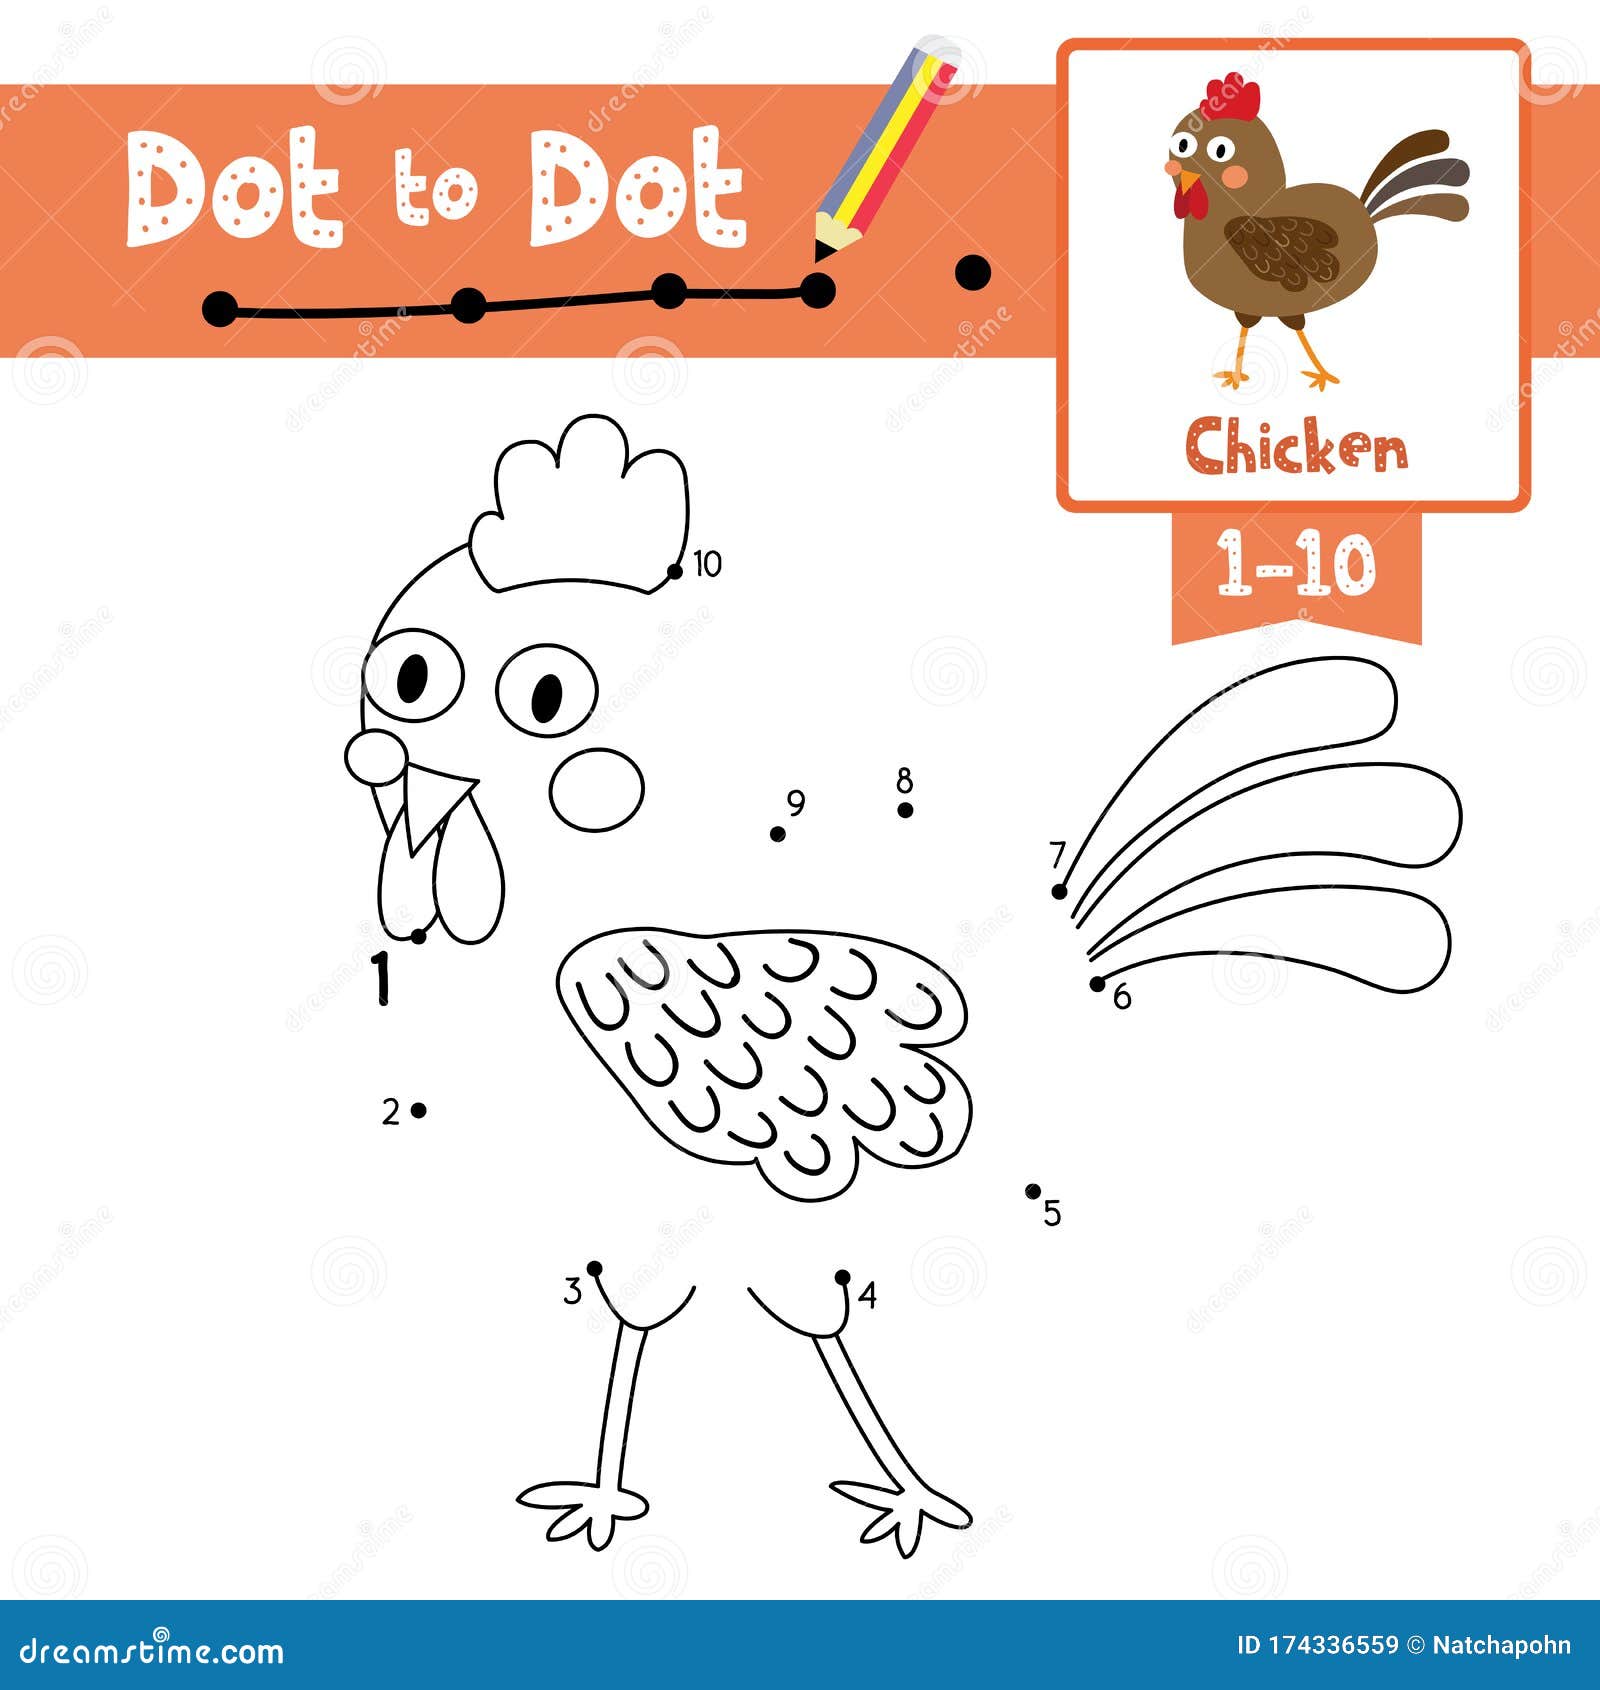 Download Dot To Dot Educational Game And Coloring Book Chicken Animal Cartoon Character Vector Illustration Stock Vector Illustration Of Count Chick 174336559